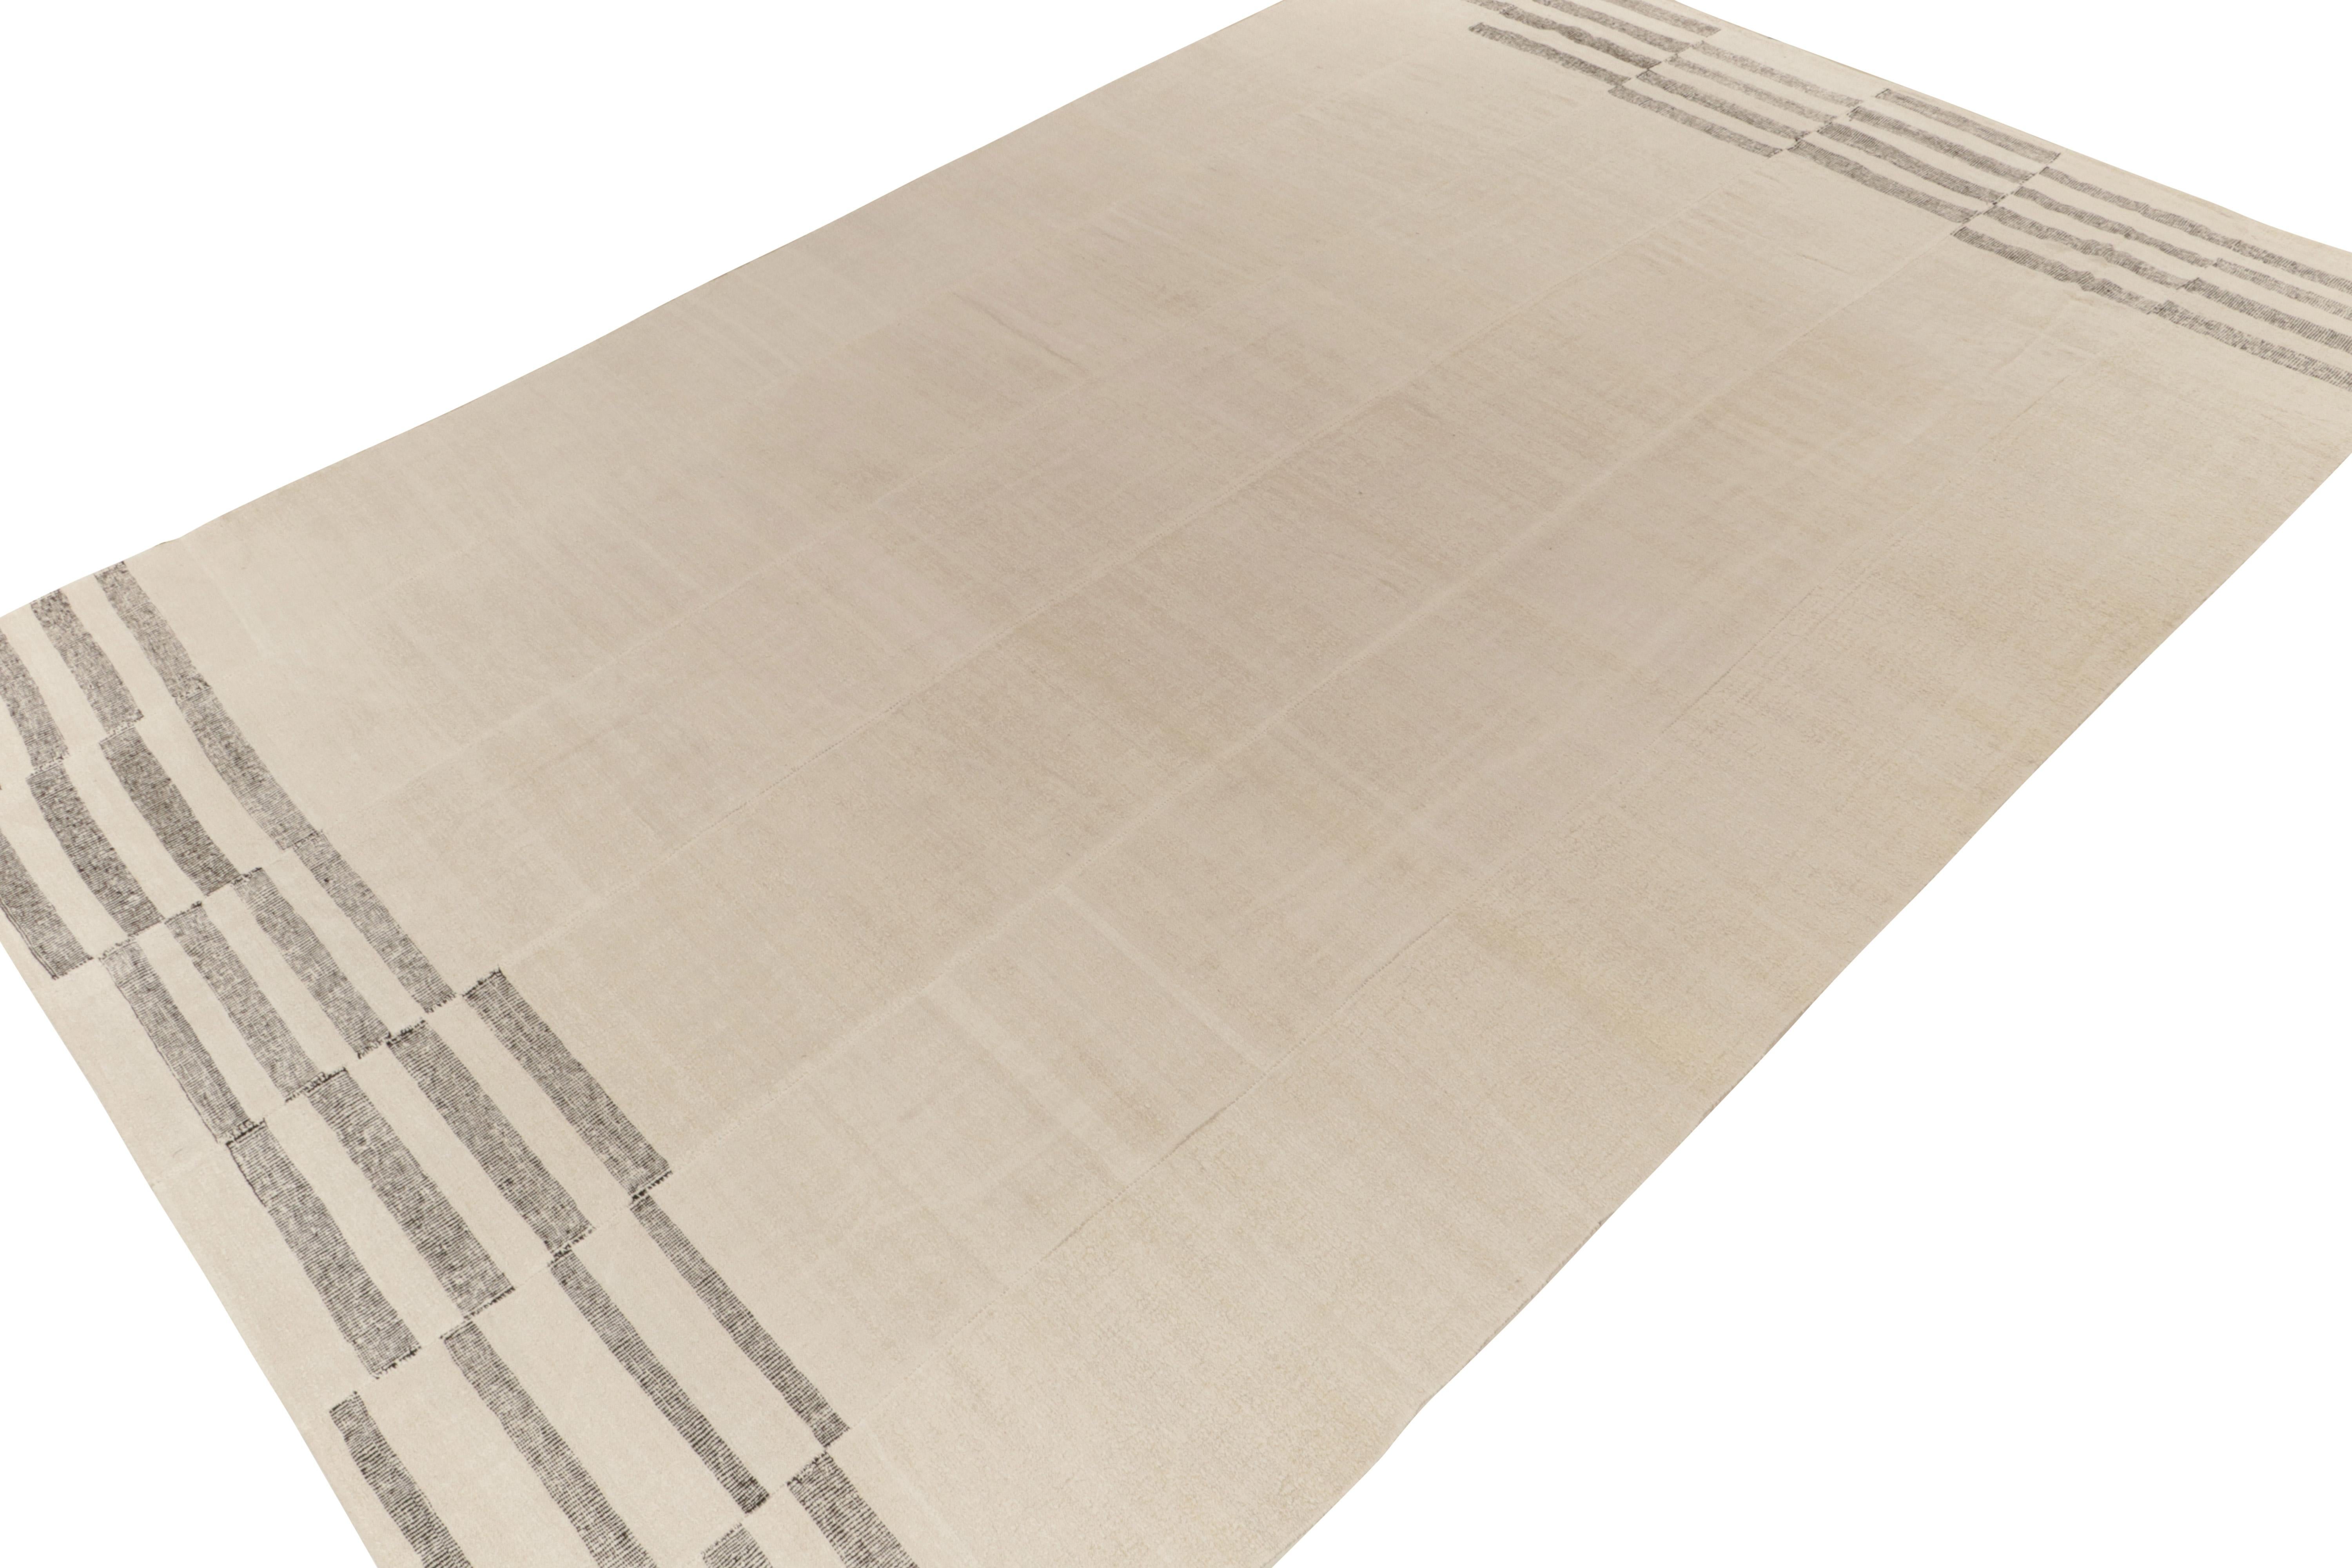 Handwoven in a blend of wool, hemp and linen, an 11x17 mid-century marvel from Rug & Kilim’s rare, new curation of large-size kilims in the panel-woven style. This 1950s piece stands alone for gracious size, refreshing beige and off-white colors,